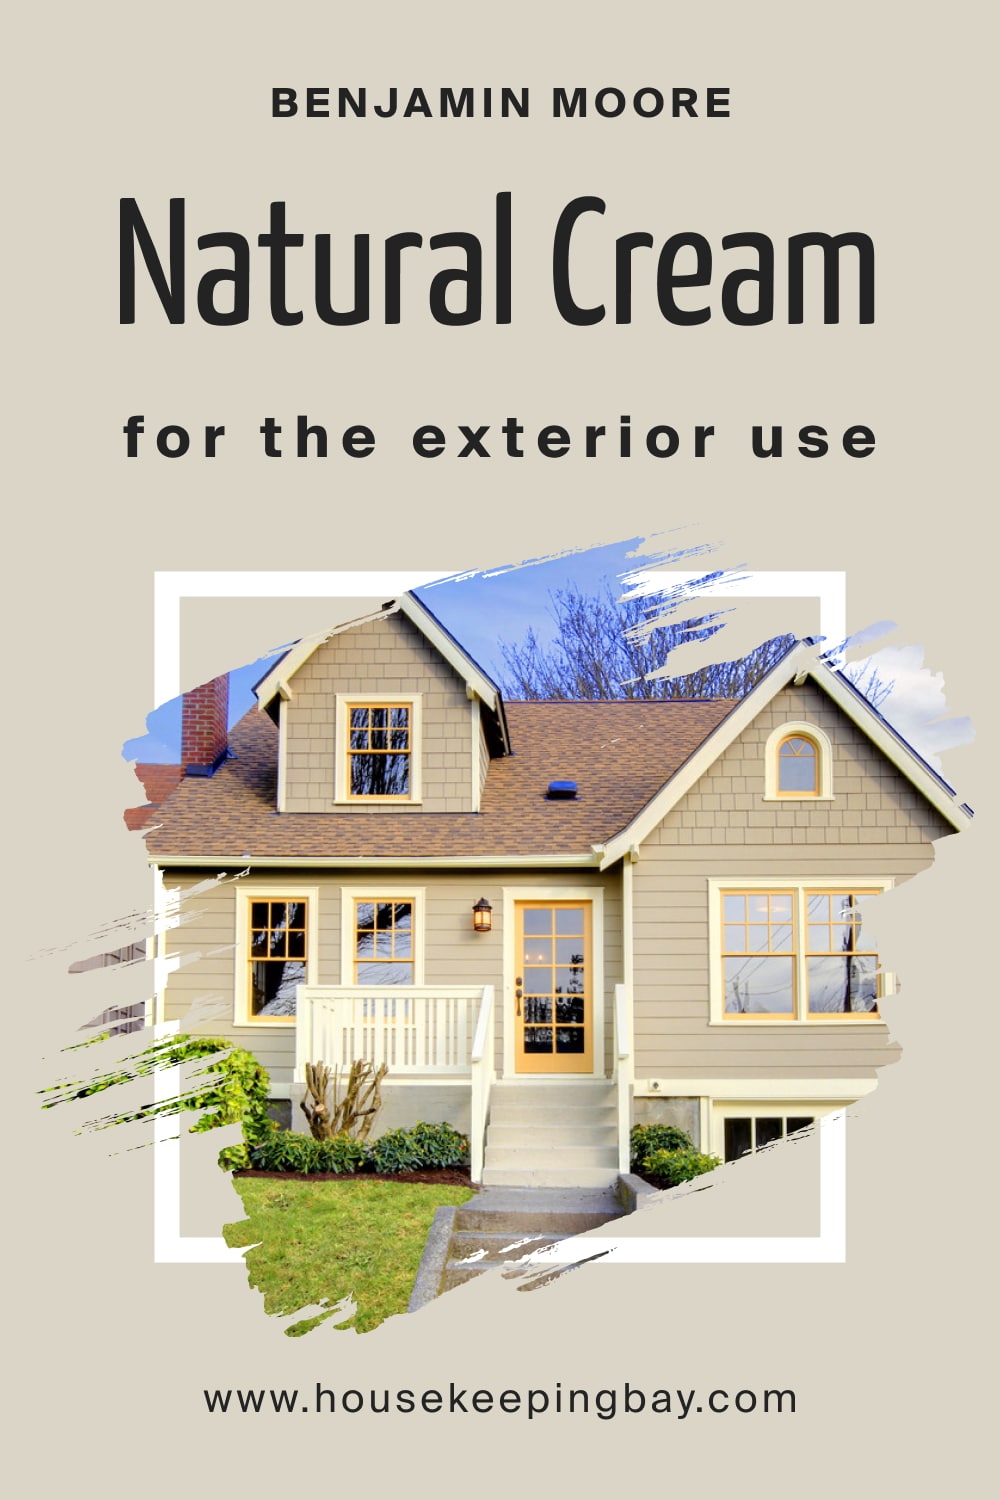 Sherwin Williams. Natural Cream OC 14 For the exterior